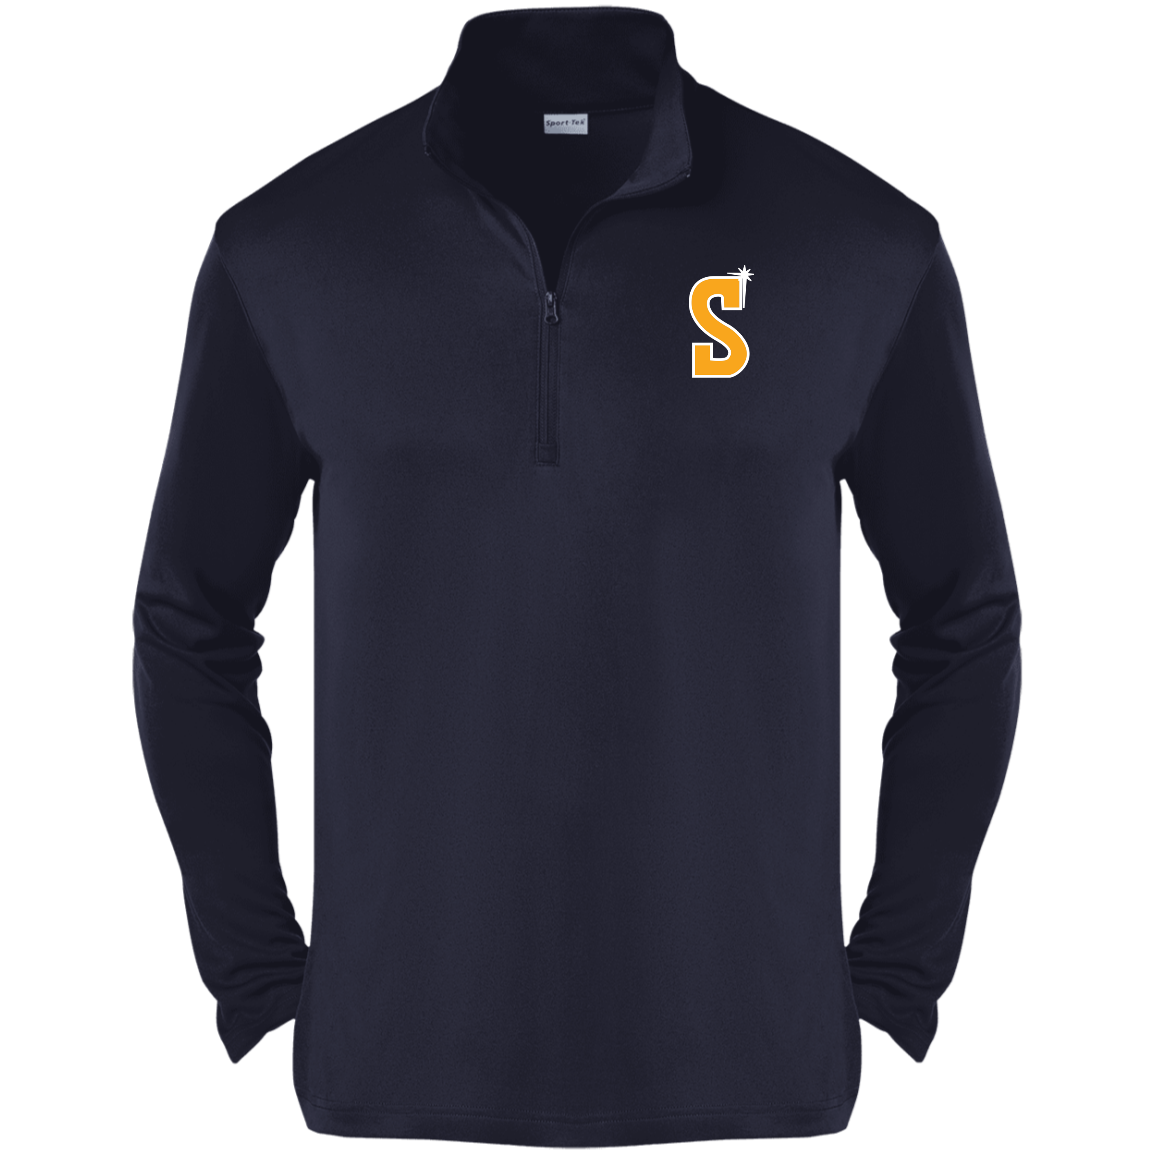 "S" ST357 Competitor 1/4-Zip Pullover